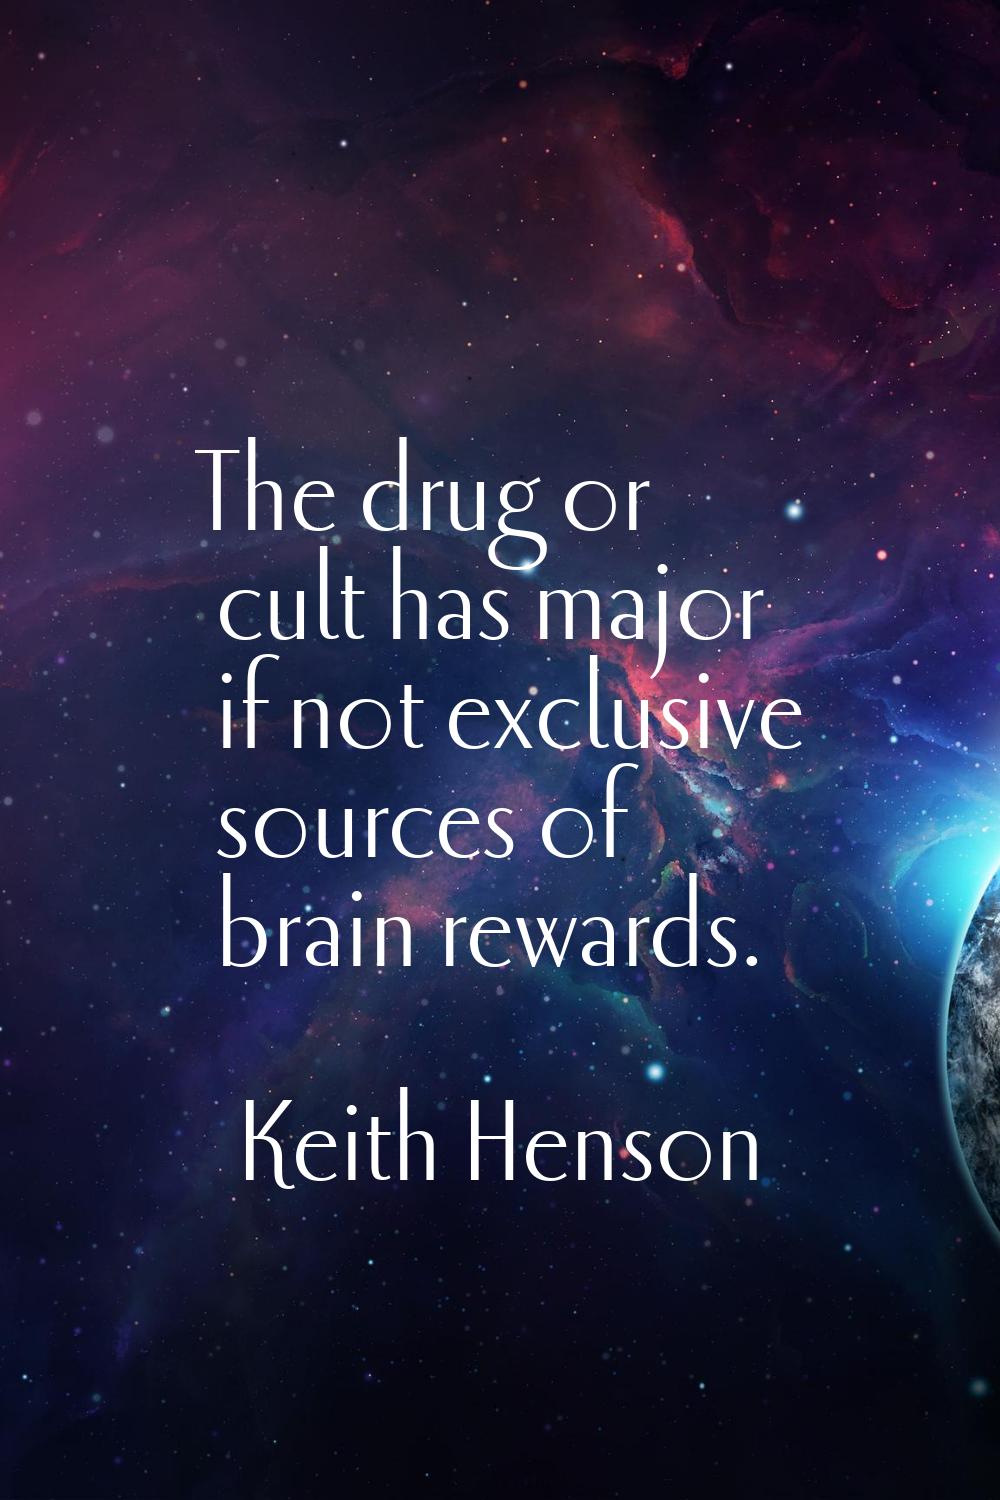 The drug or cult has major if not exclusive sources of brain rewards.